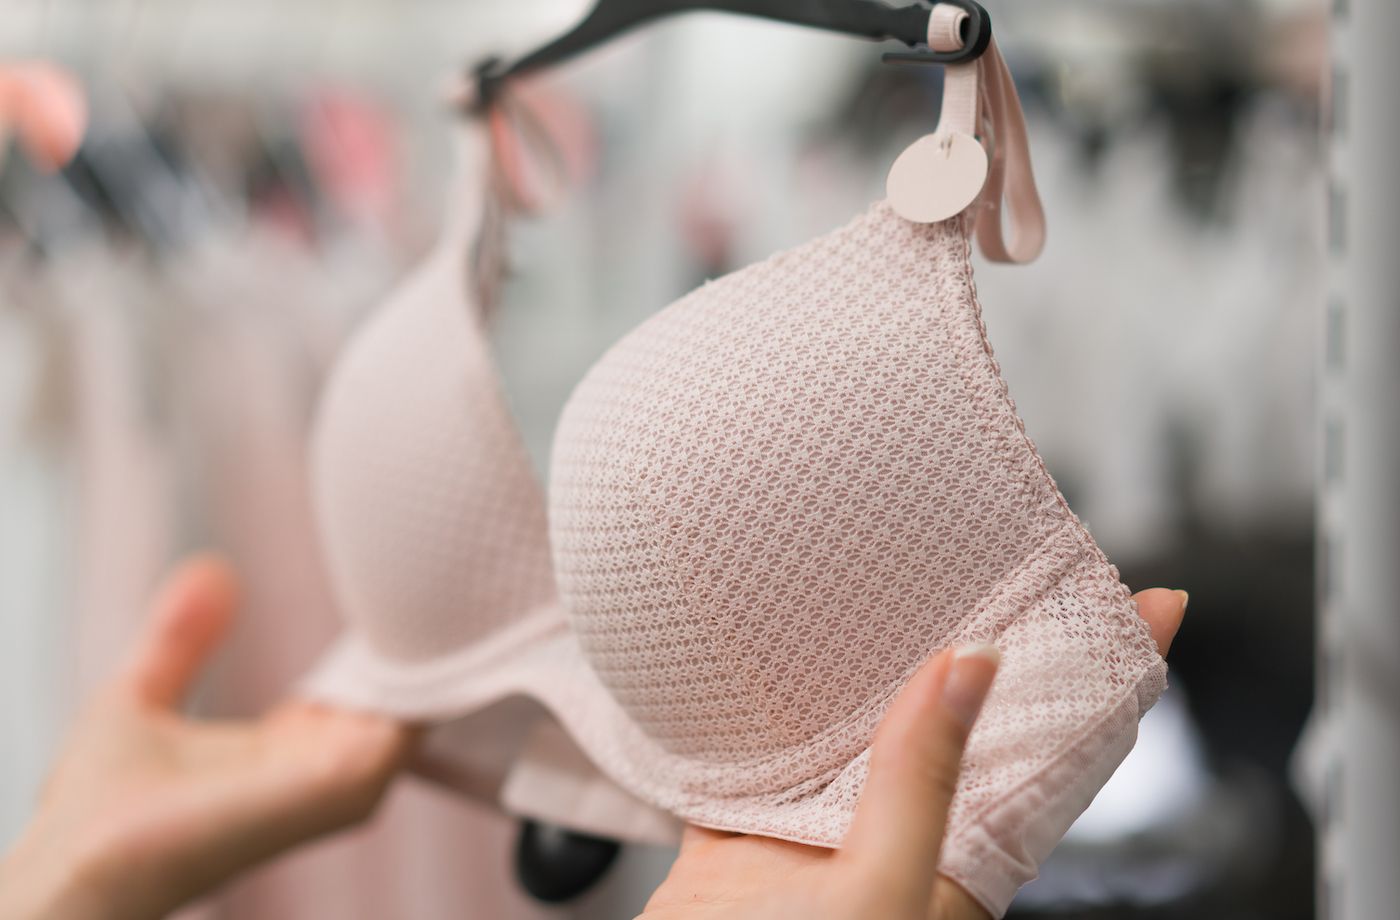 A woman inspects a bra while shopping in a store.